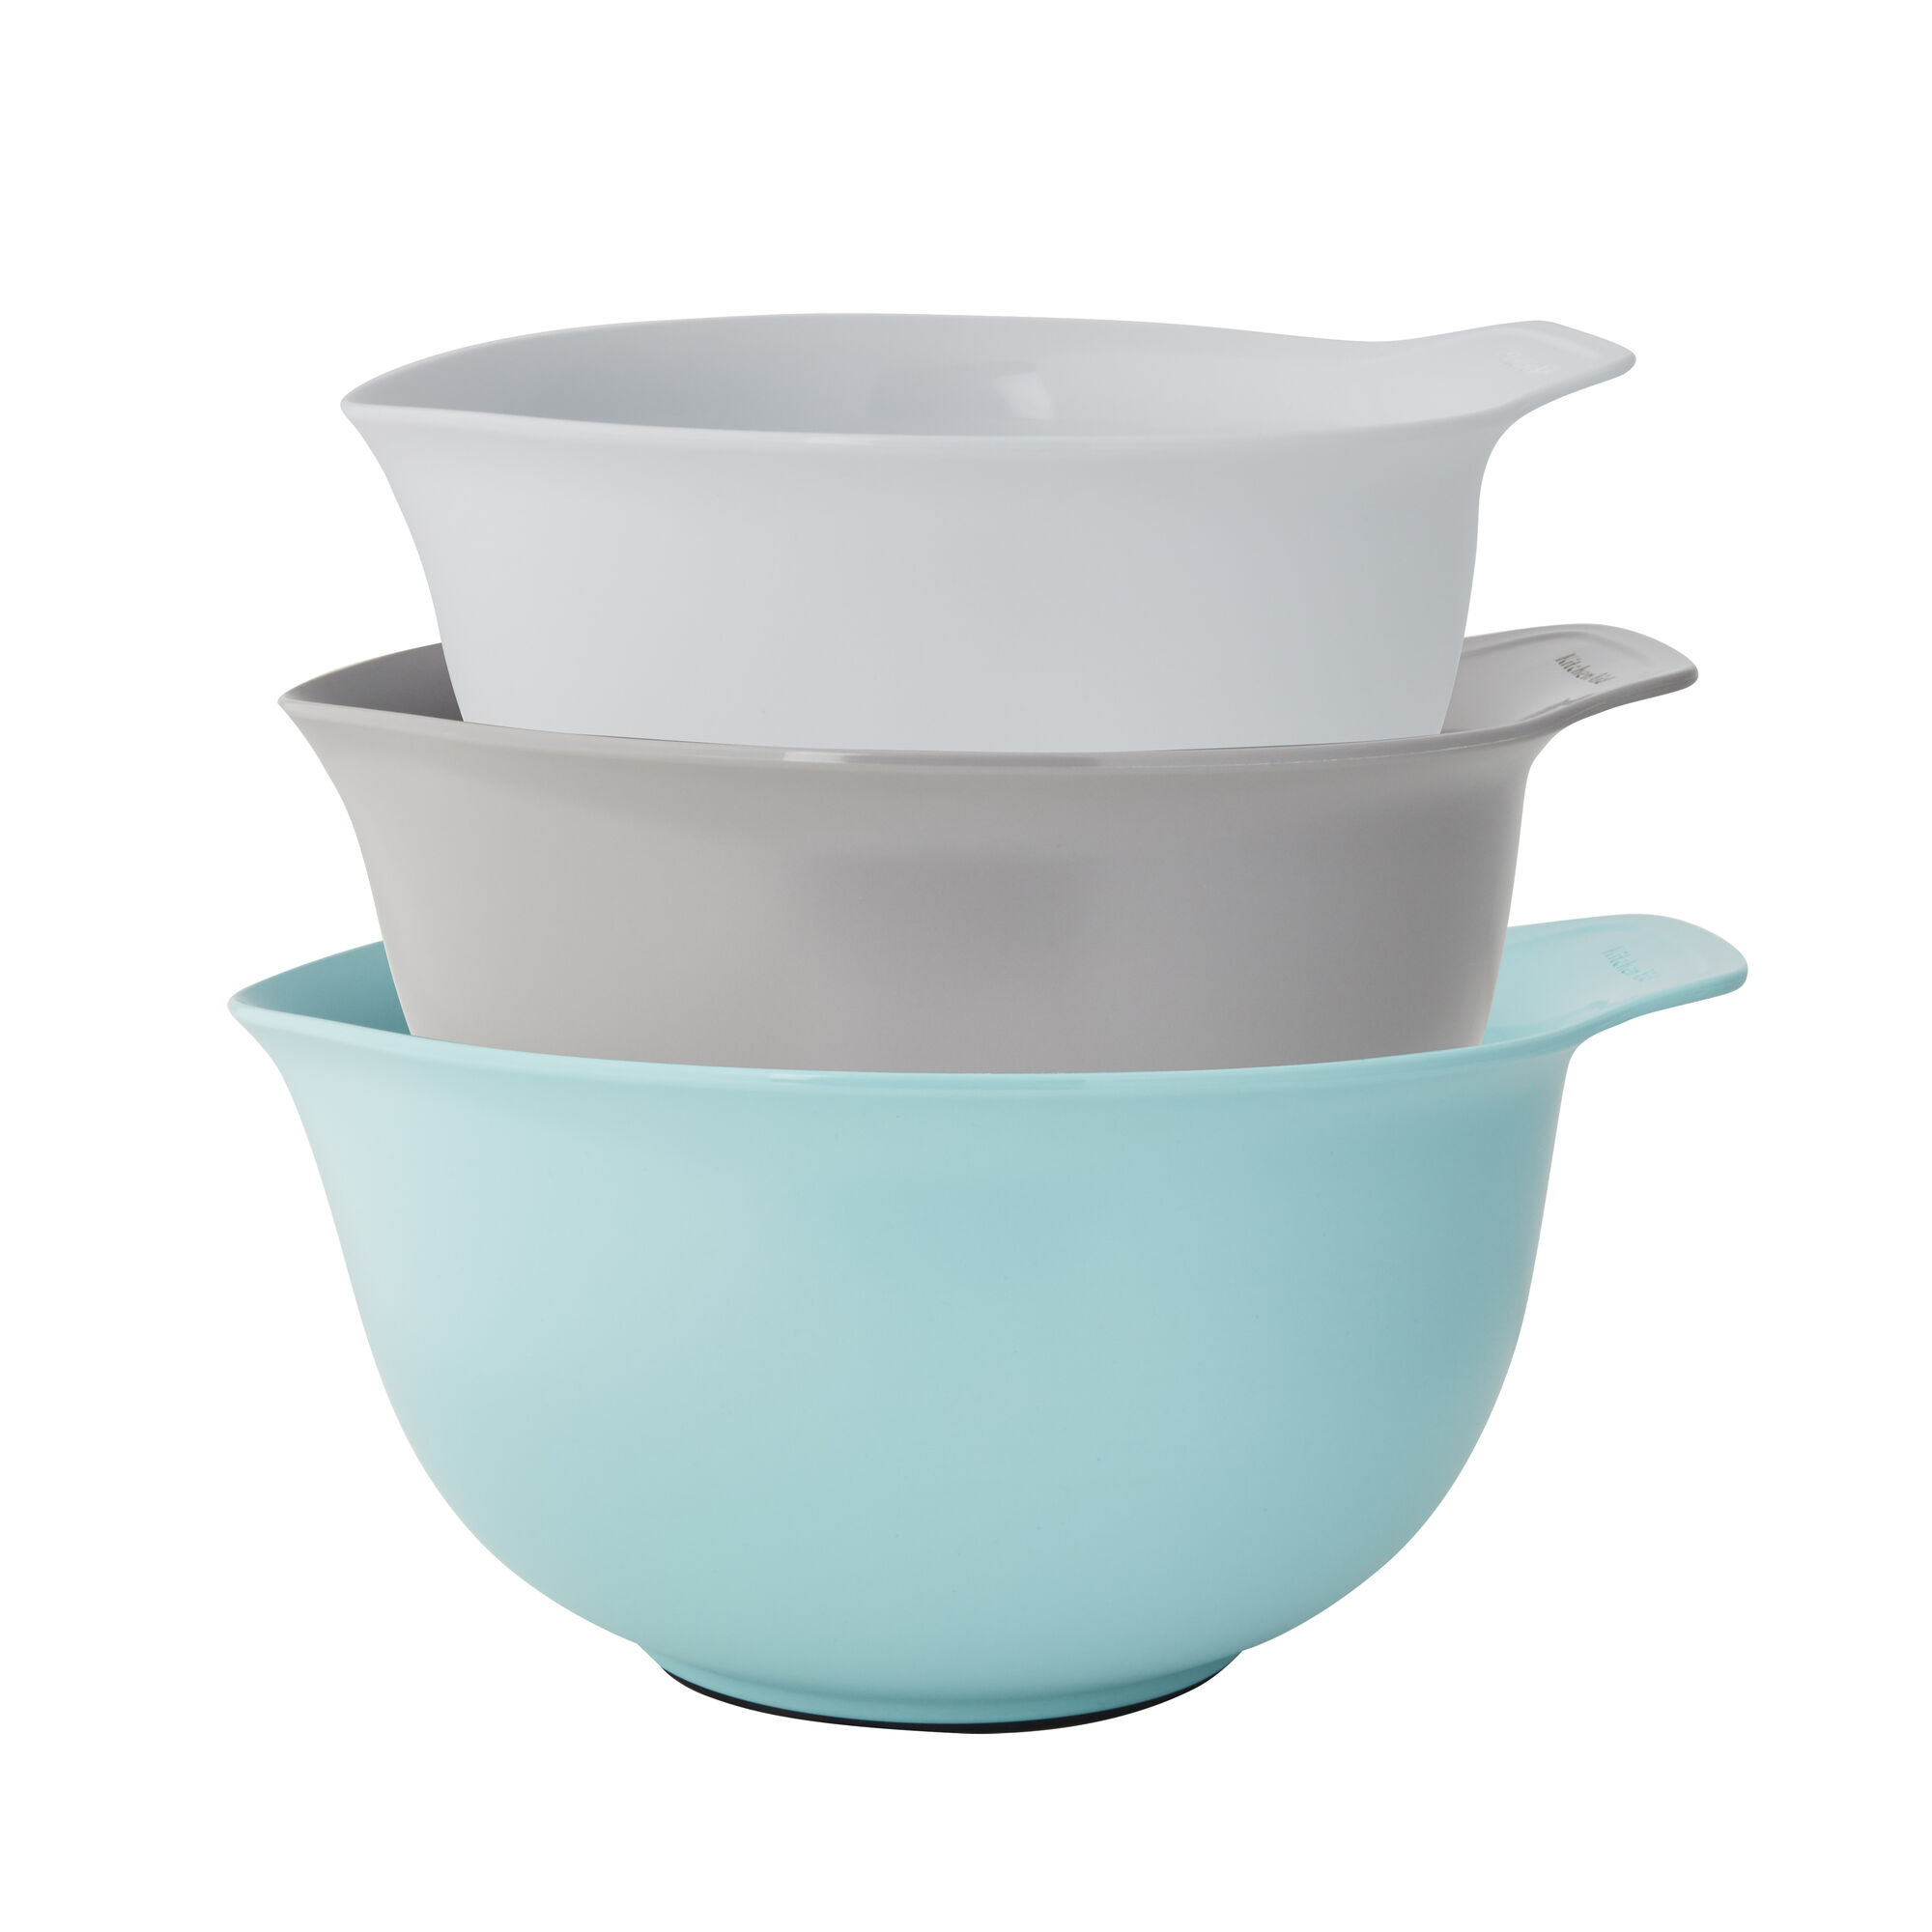 GLAD Mixing Bowls with Pour Spout, Set of 3 | Nesting Design Saves Space |  Non-Slip, BPA Free, Dishwasher Safe Plastic | Kitchen Cooking and Baking